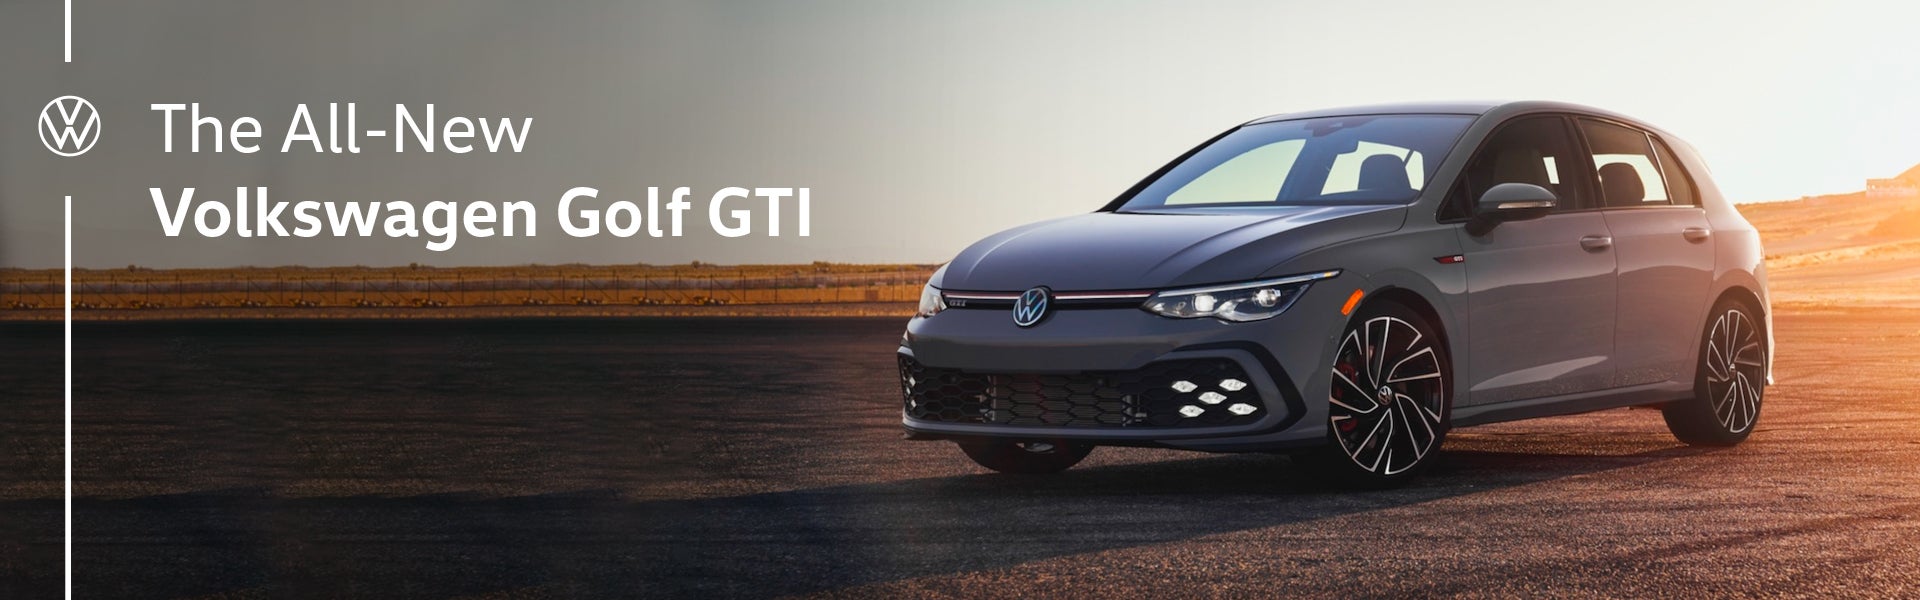 The All-New Volkswagen Gold GTI at Ewald Volkswagen of Menomonee Falls in Menomonee Falls, WI